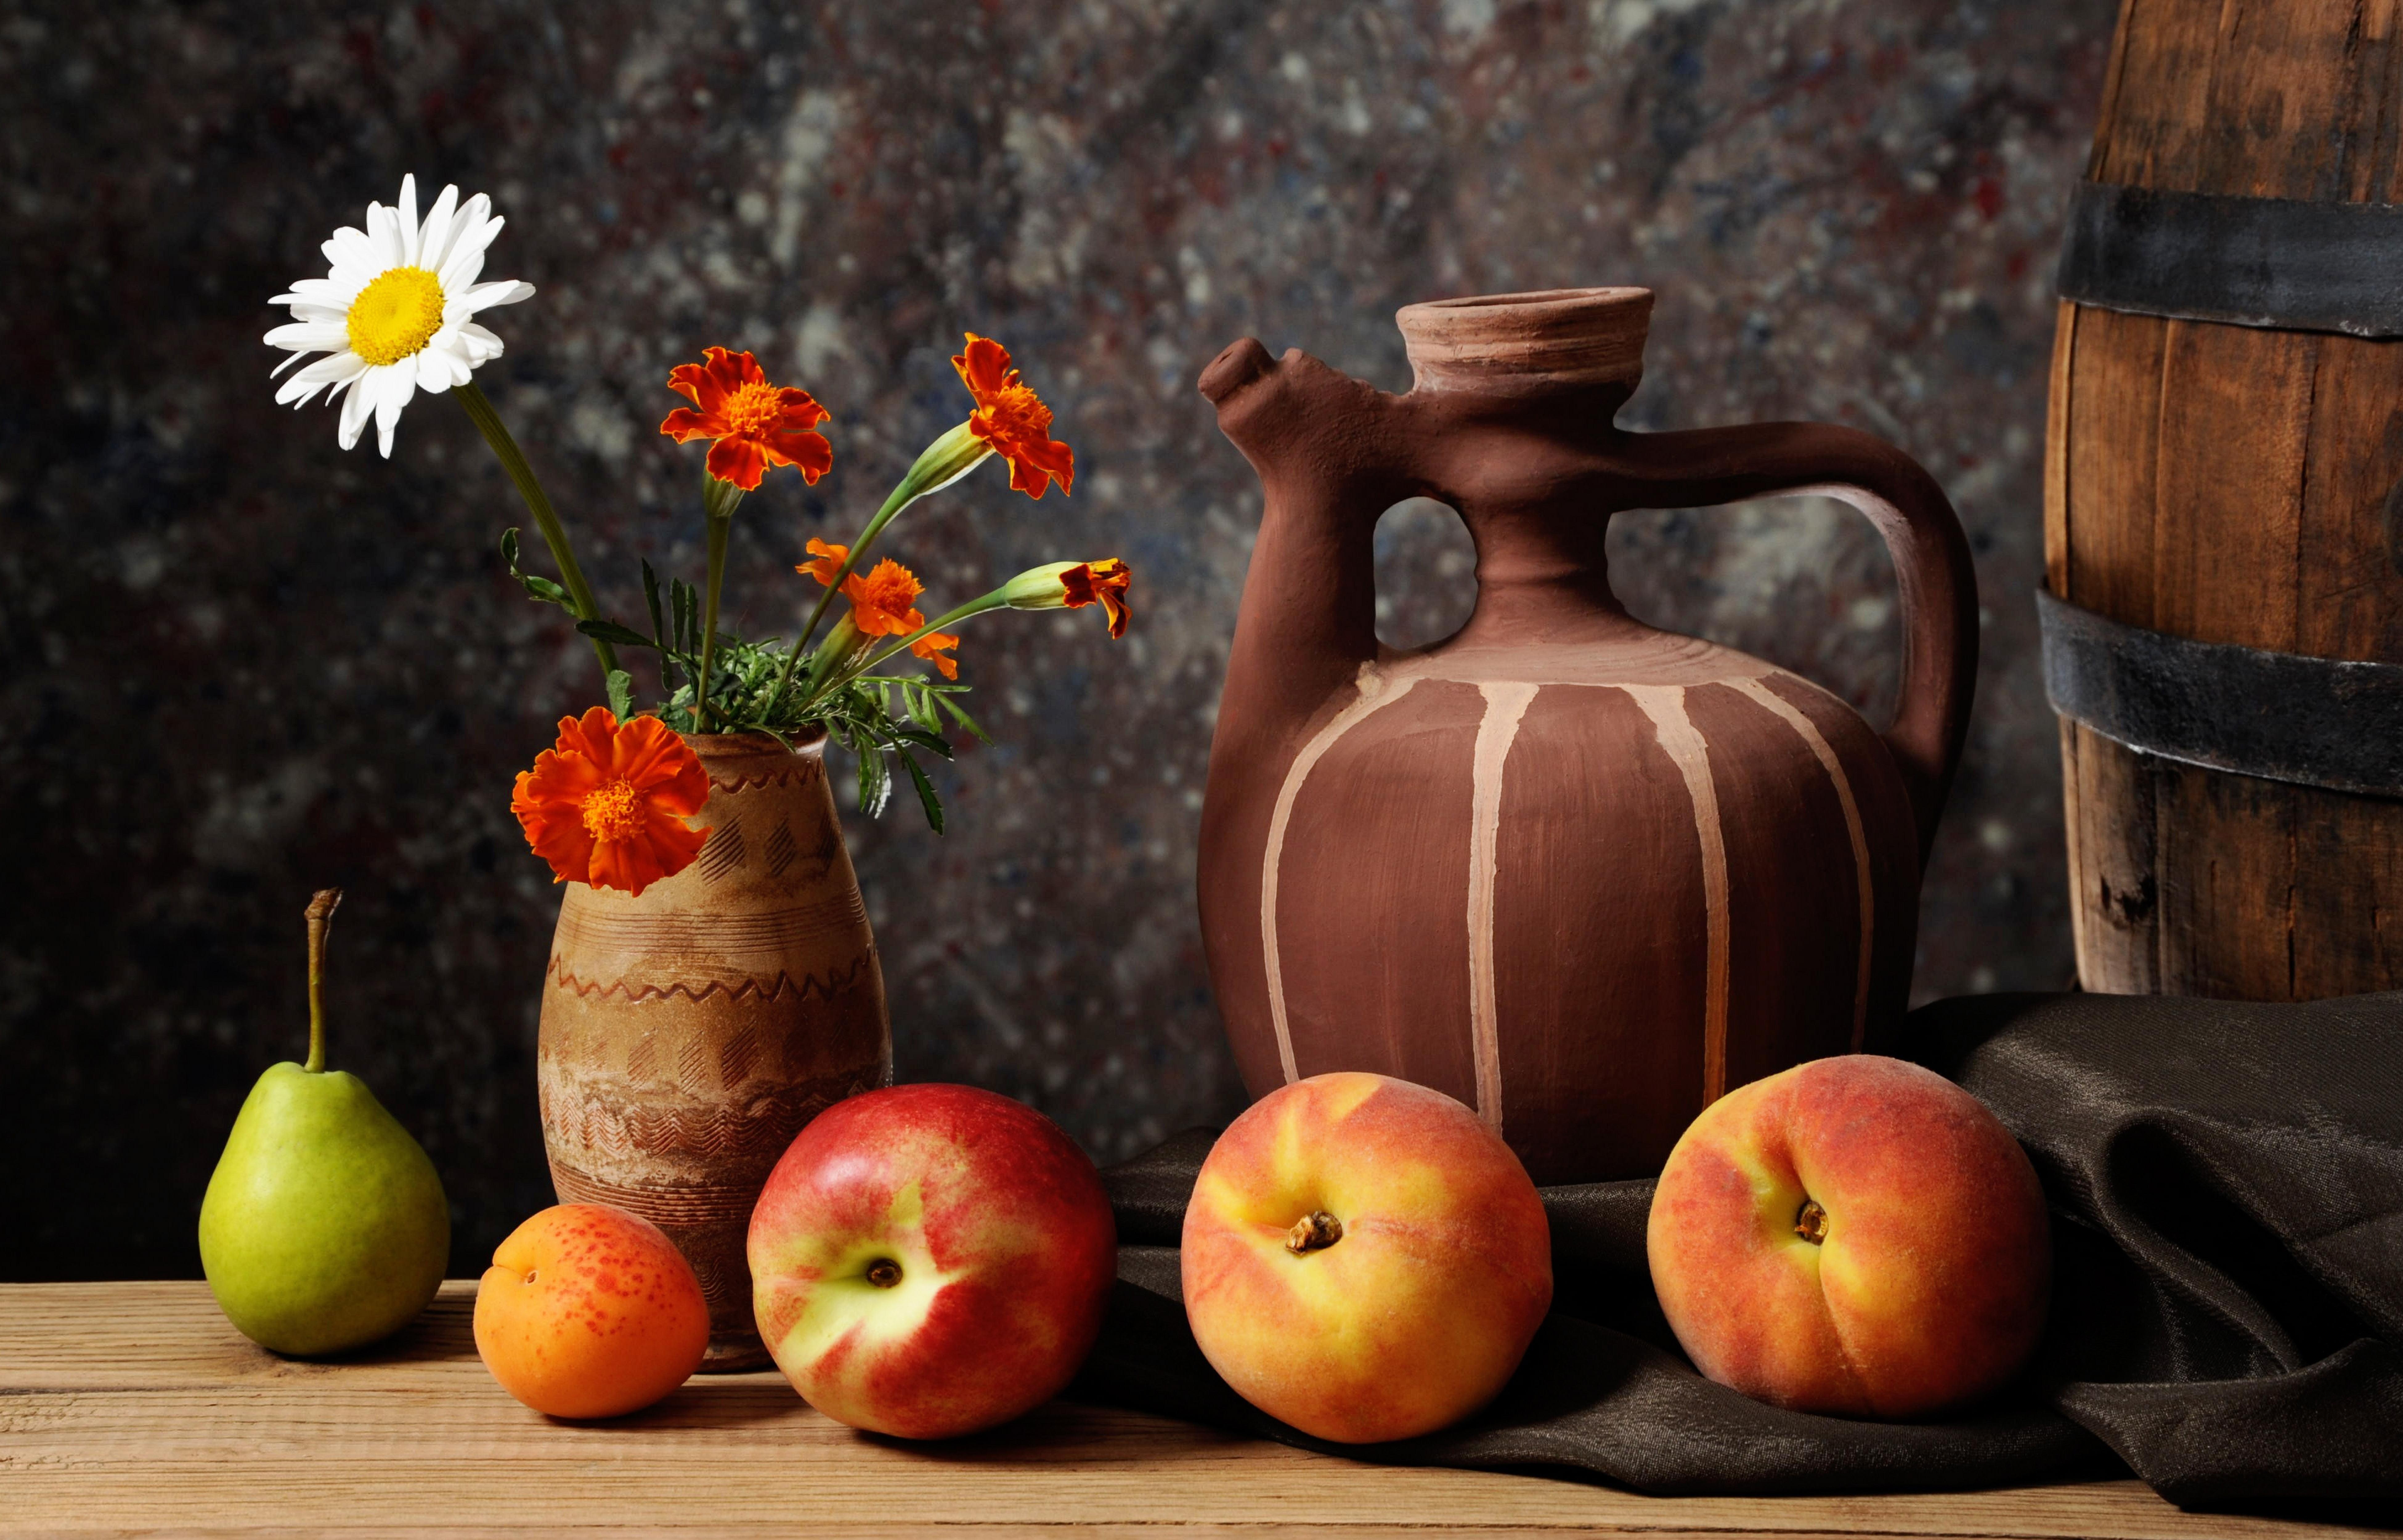 Fruit and a vase of flowers wallpaper and image